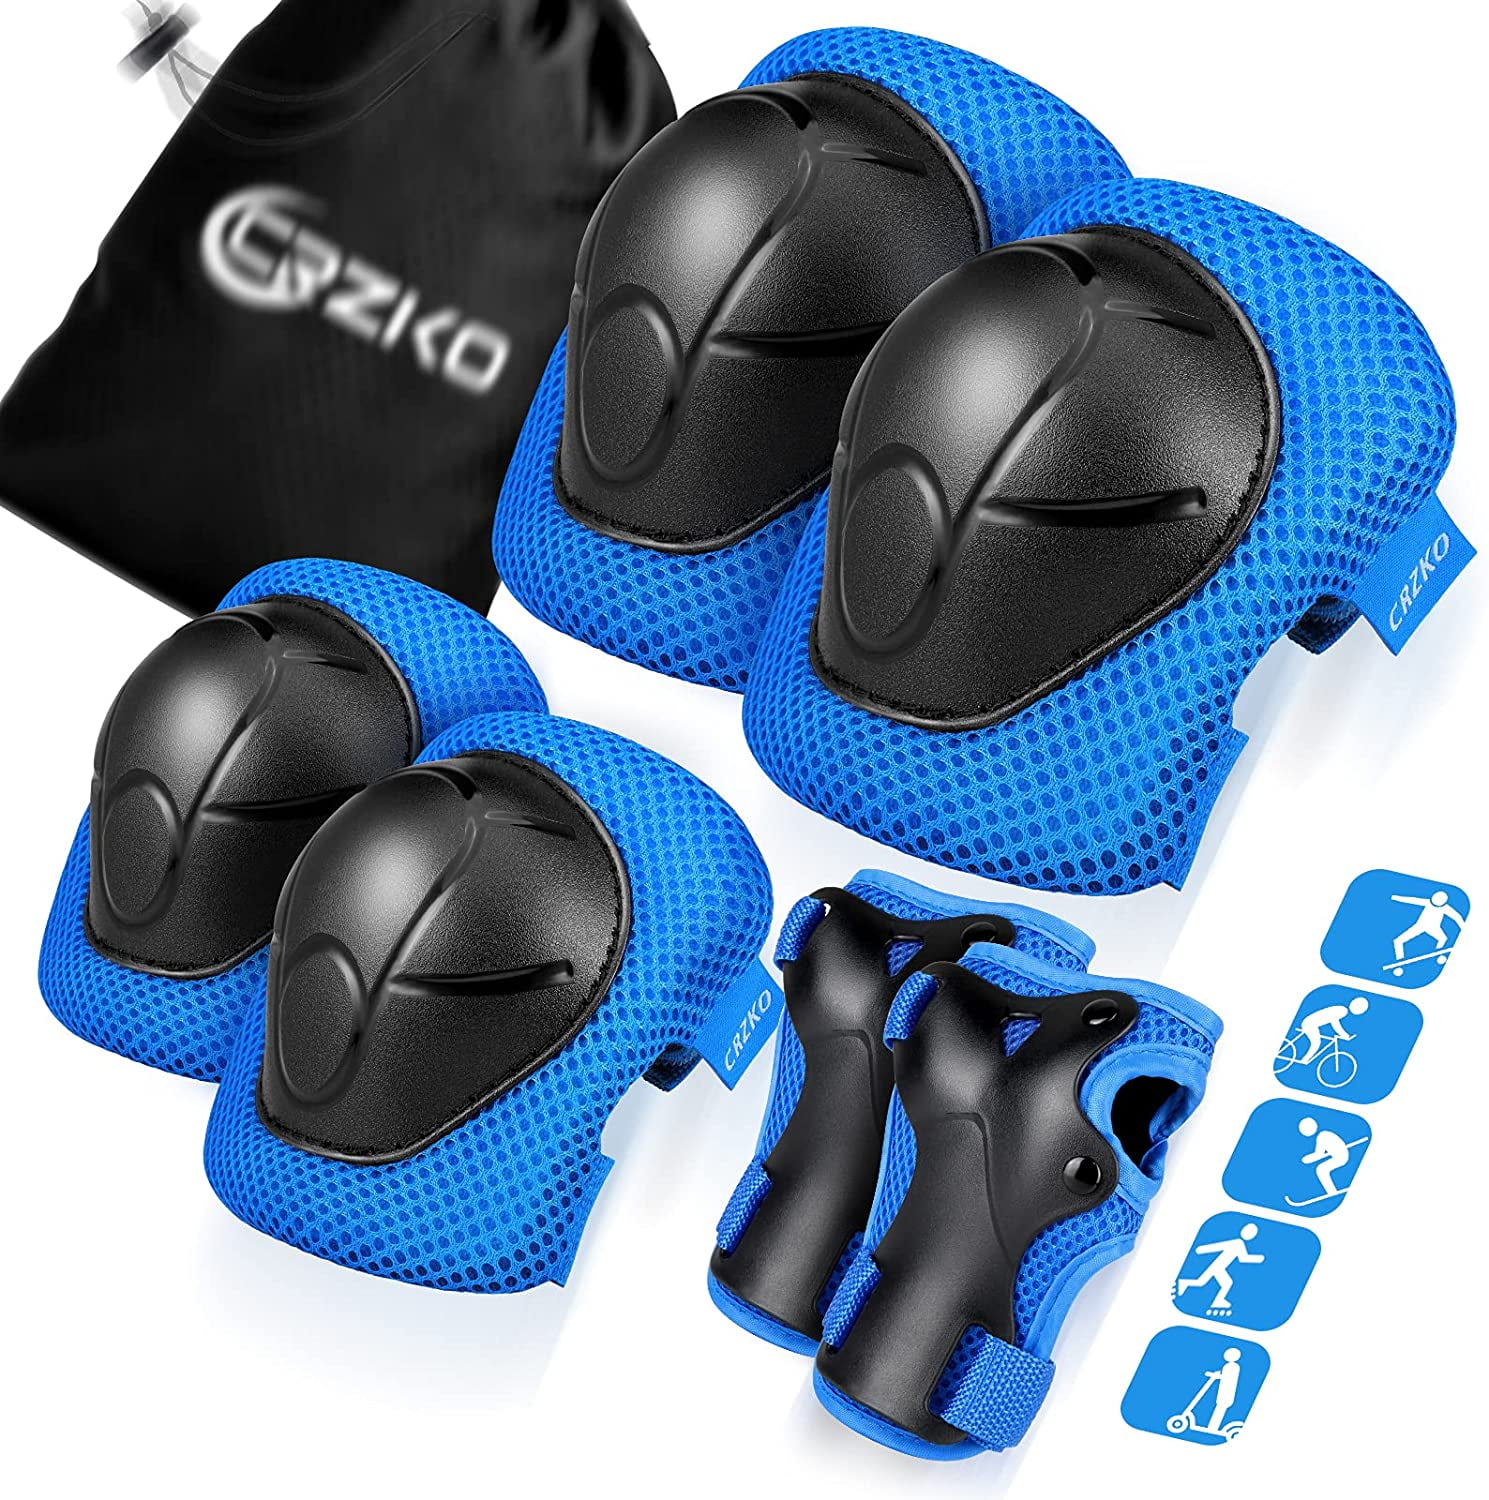 CRZKO Kids/Teenager Protective Gear Knee Pads and Elbow Pads 6 in 1 Set with Wrist Guard and Adjustable Strap for Rollerblading Skateboard Cycling Skating Bike Scooter